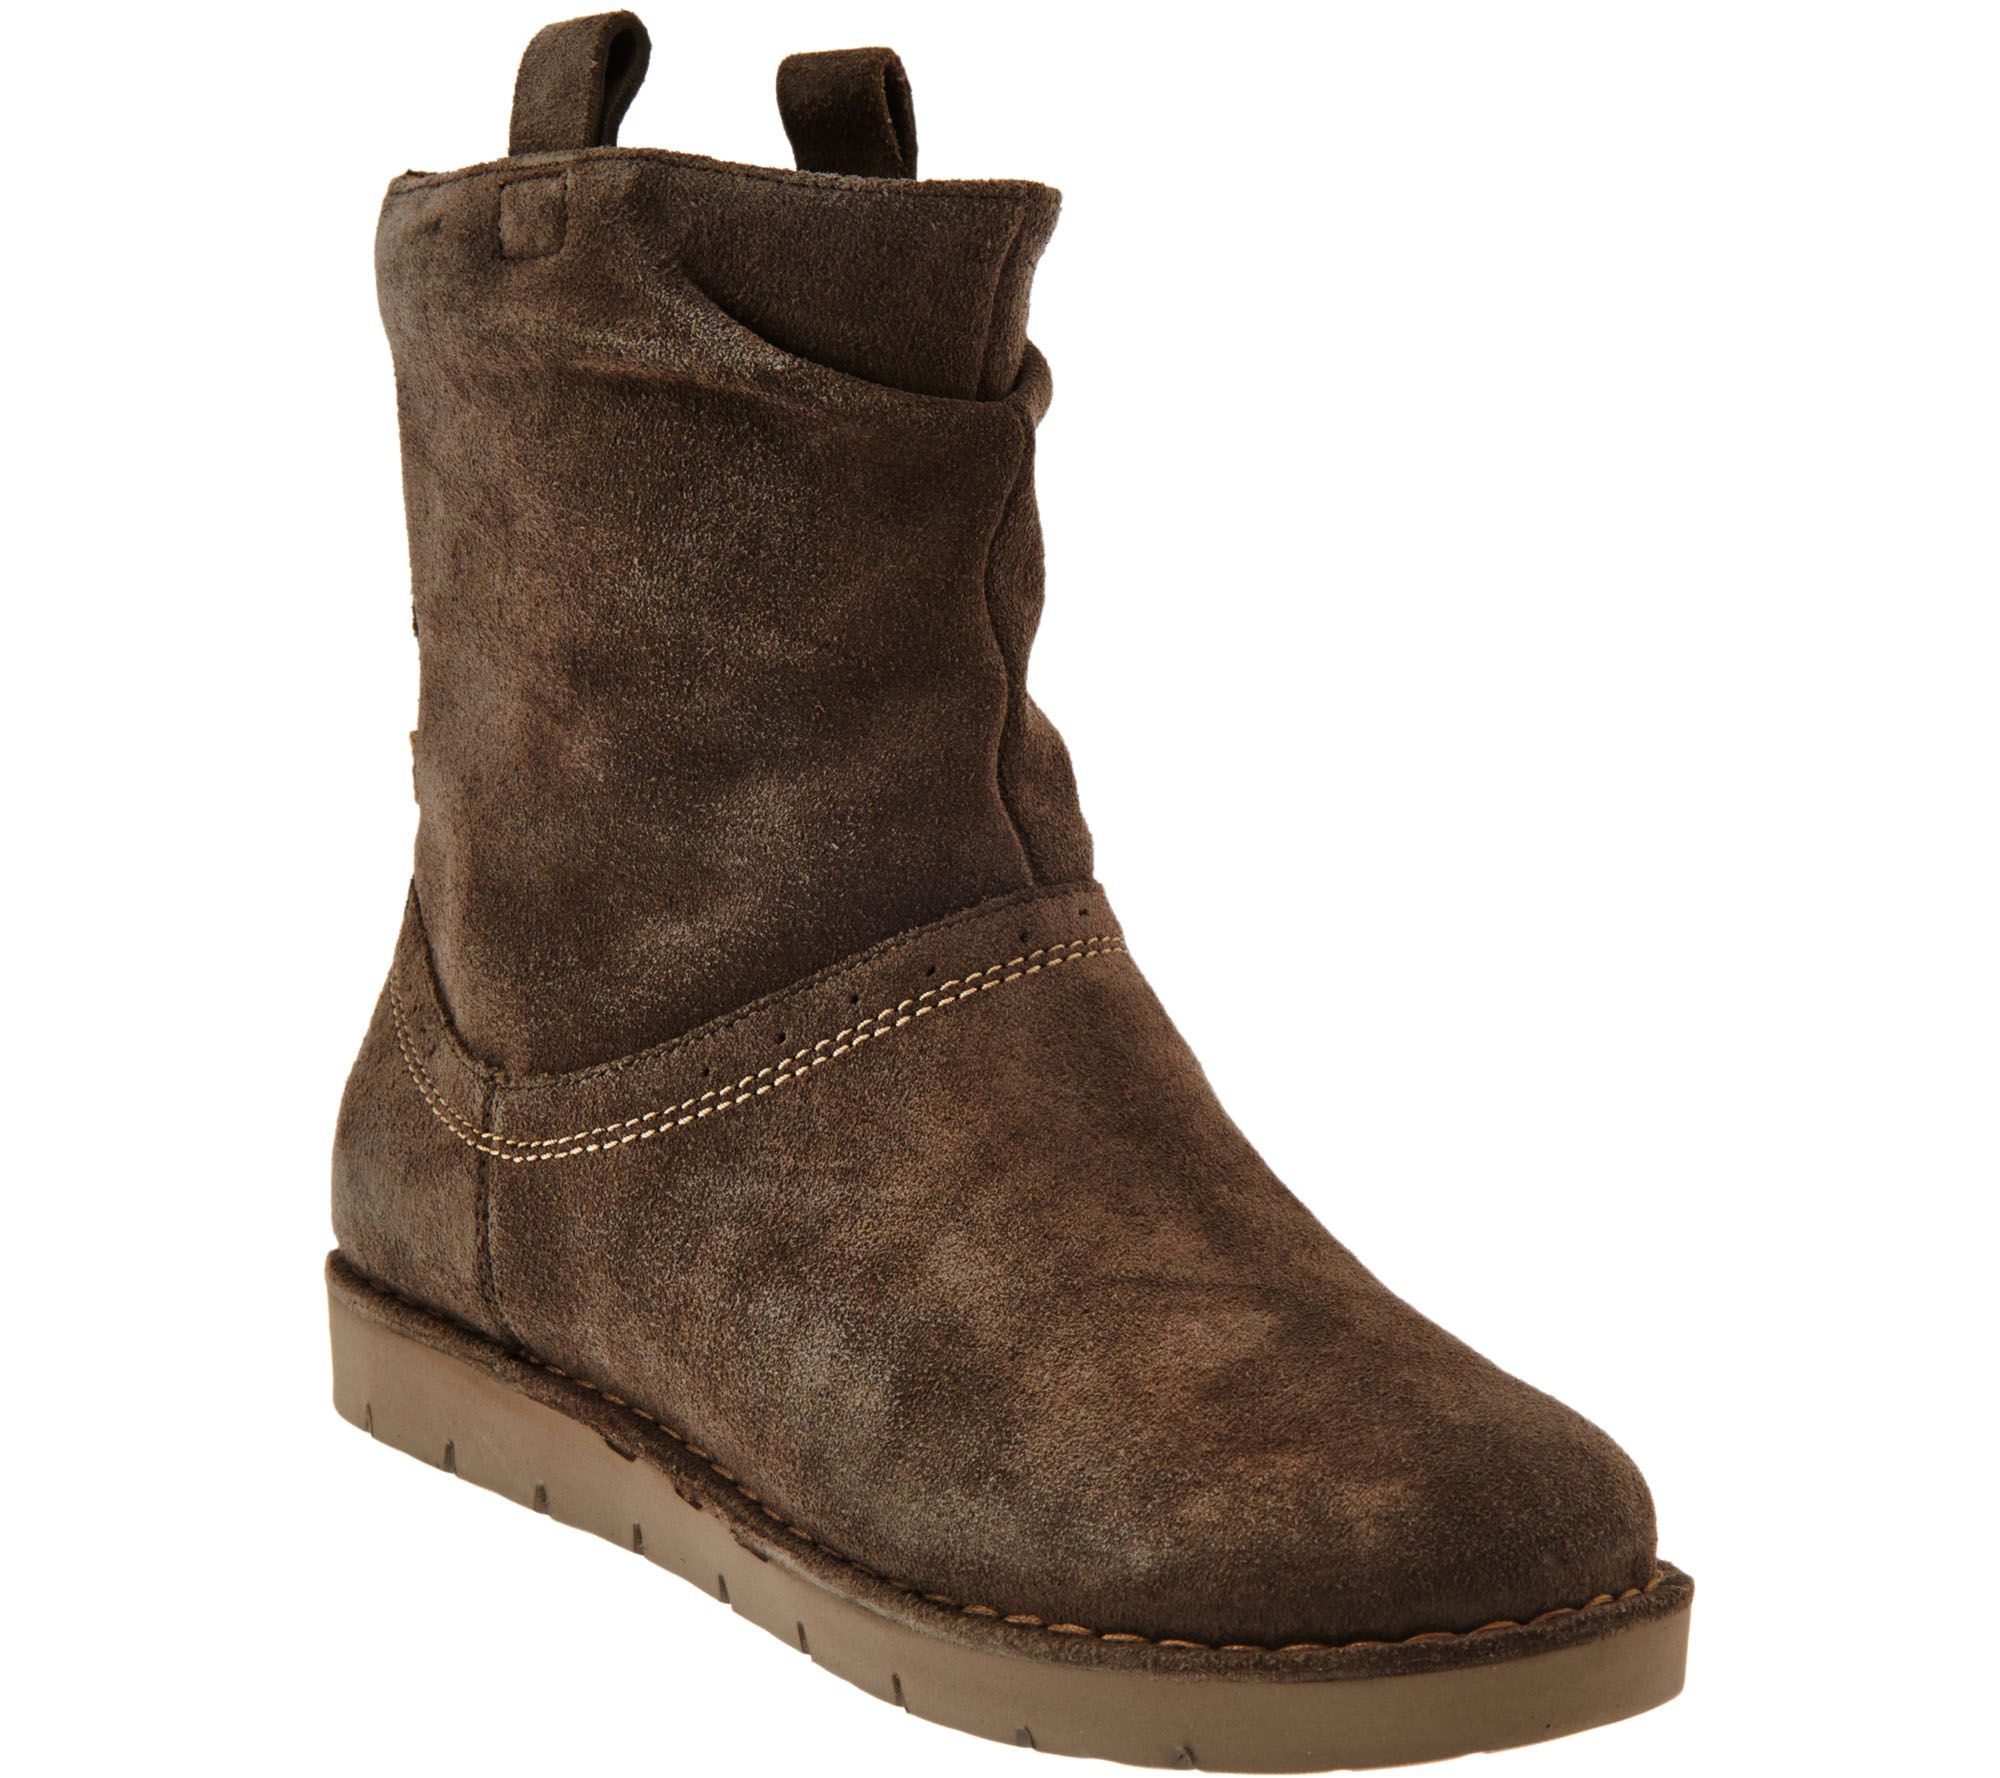 clarks unstructured boots